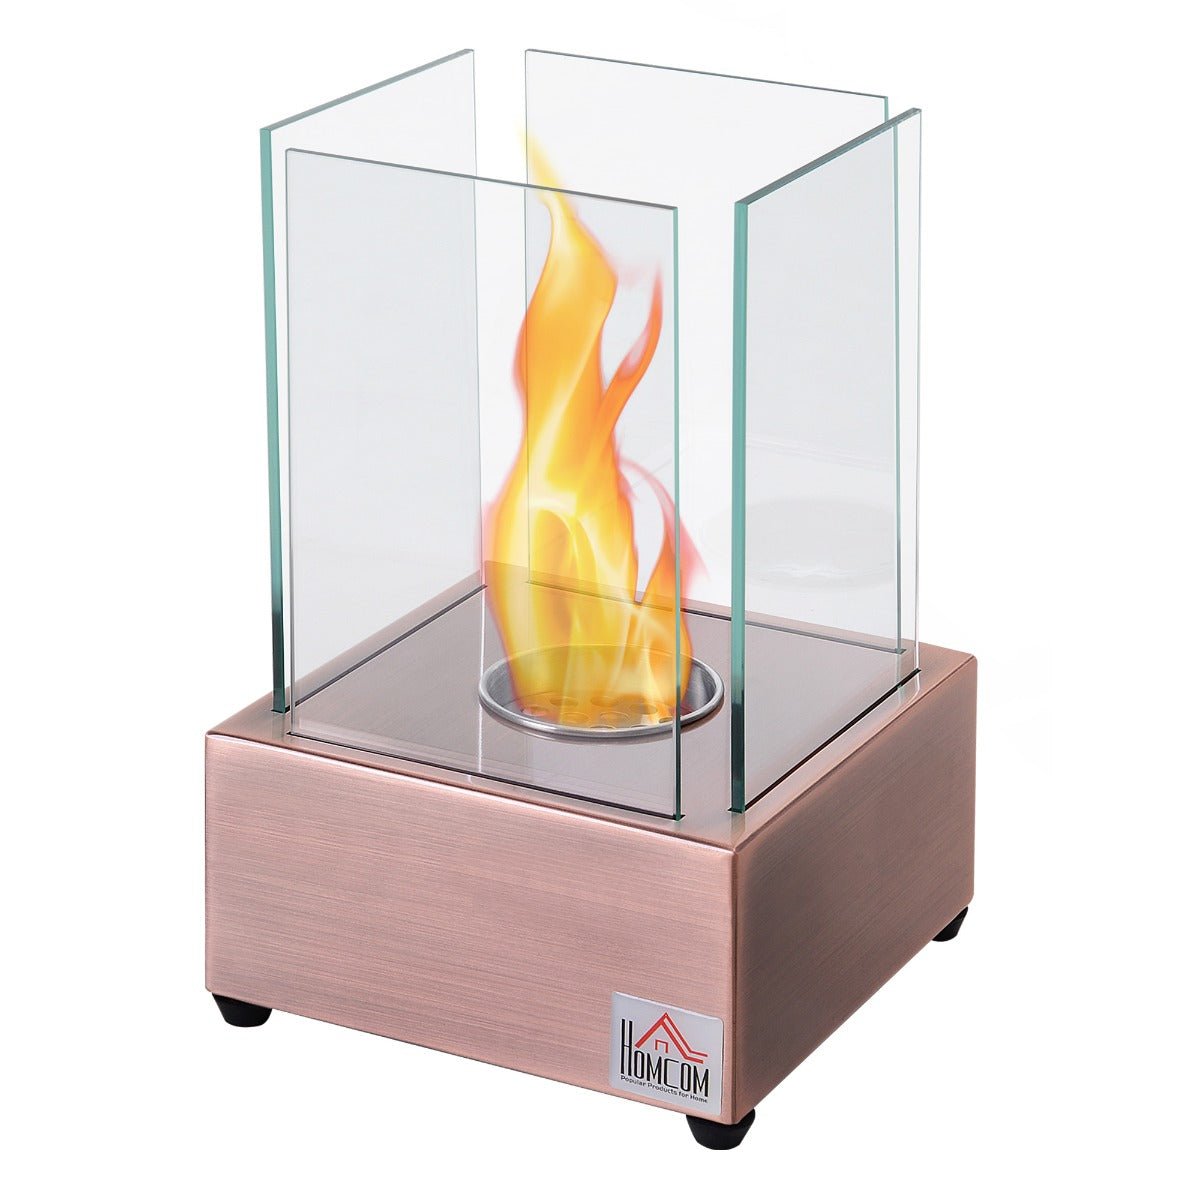 Miscellaneous-Ethanol Fireplace, 7.75" Tabletop 0.10 Gal Stainless Steel 160 Sq. Ft., Burns up to 2 Hours, Bronze - Outdoor Style Company